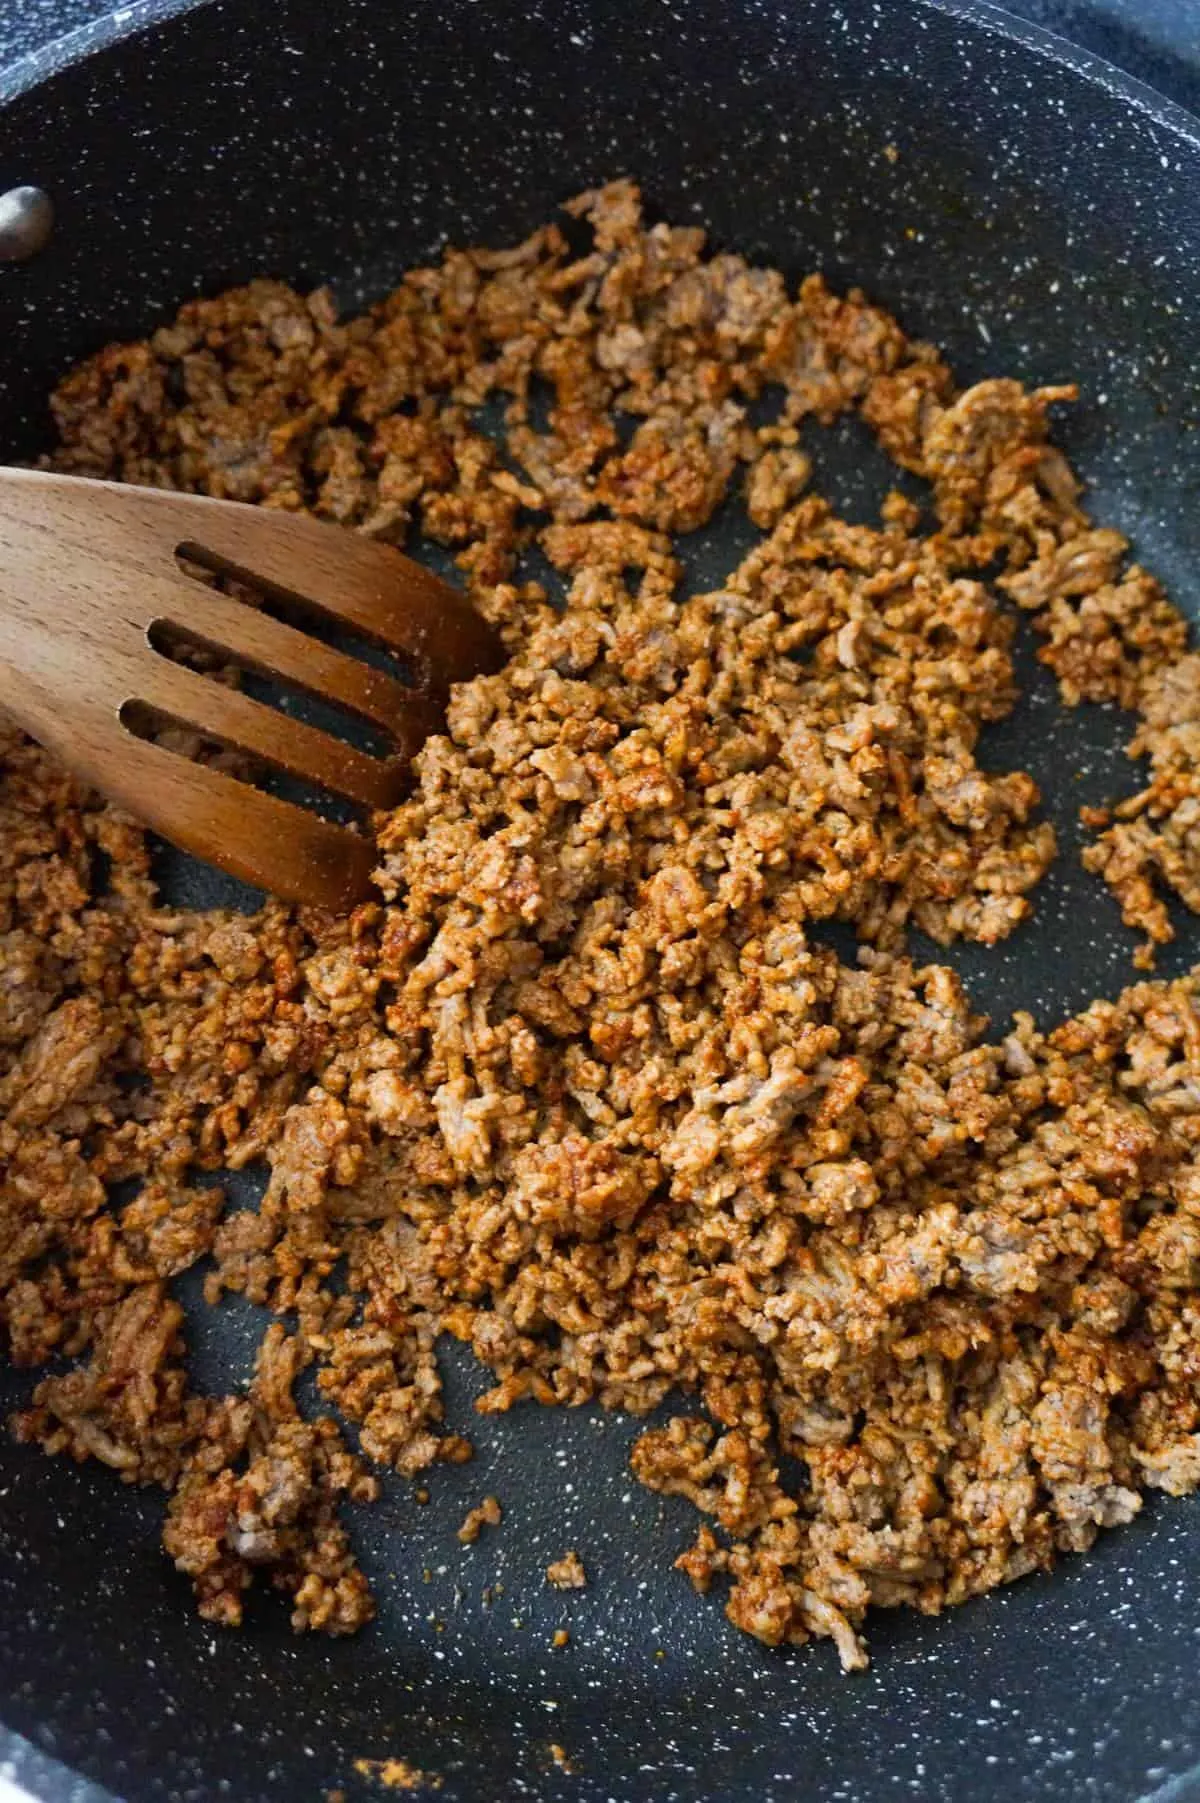 cooked ground beef coated in chili seasoning in a saute pan